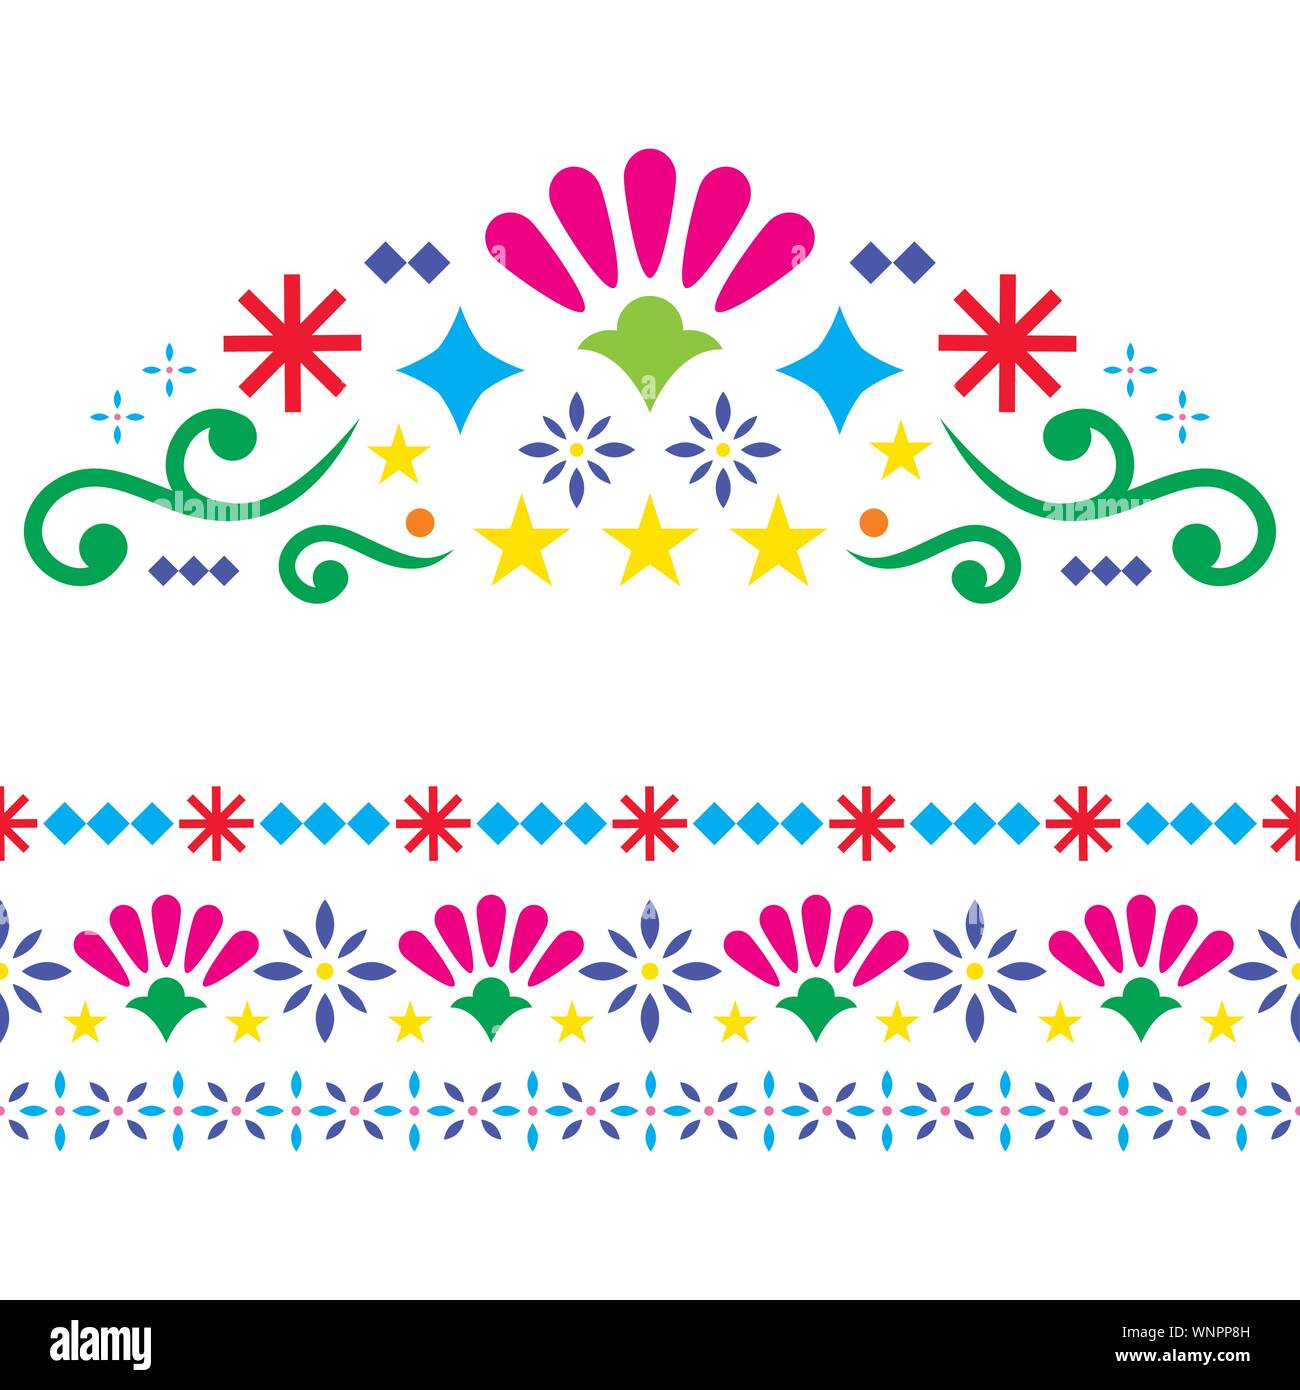 Mexican vector design elements, colorful traditional folk art patterns from Mexico, vibrant greeting card on wedding party invitation ornaments Stock Vector